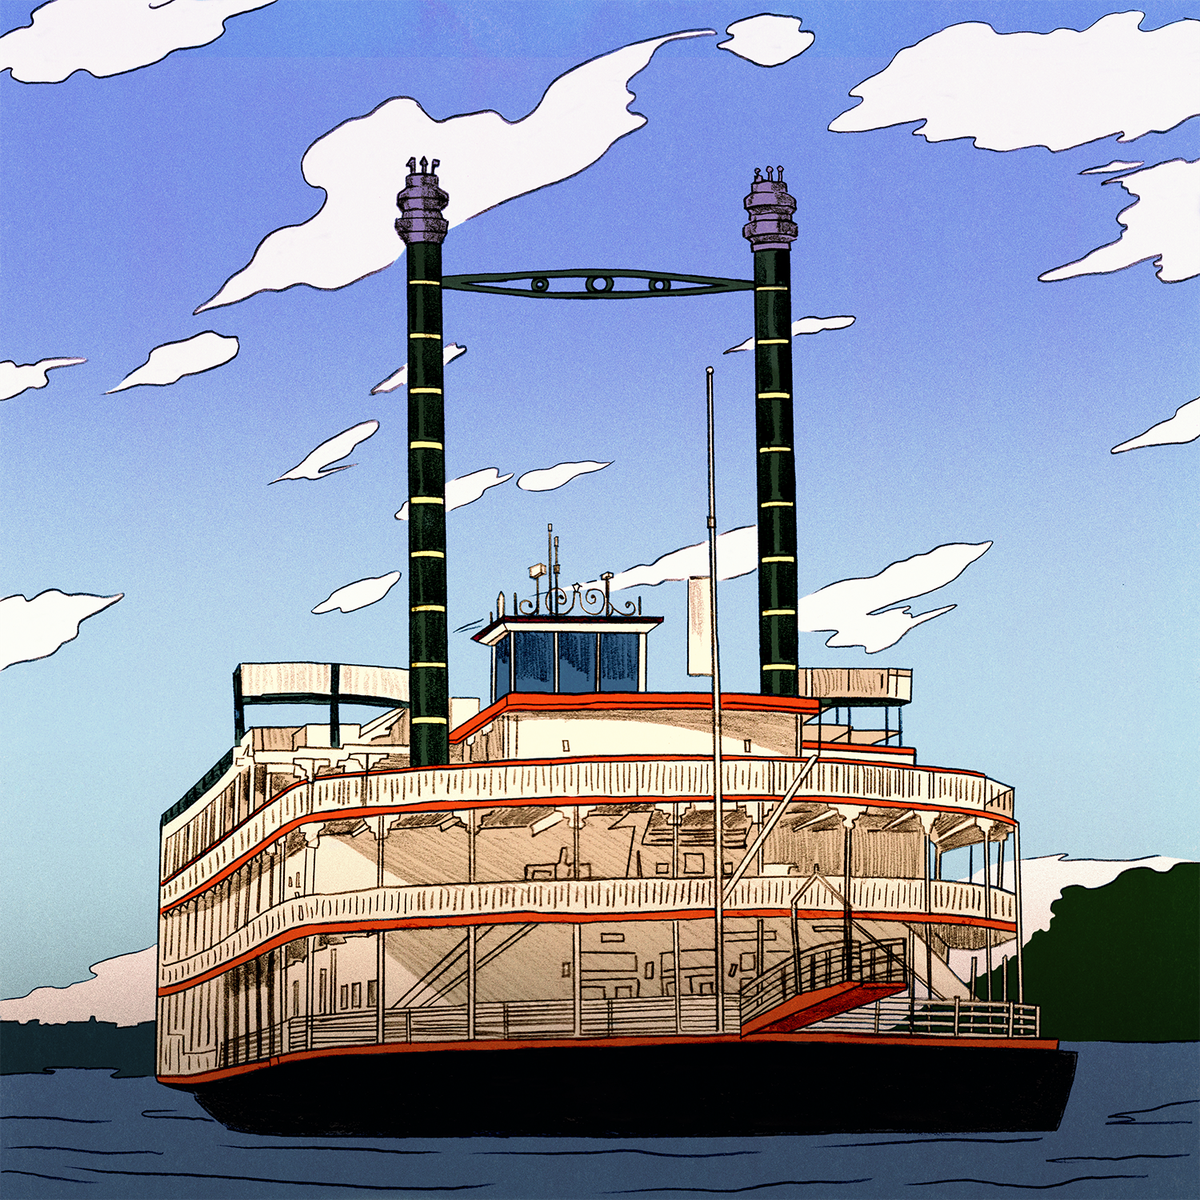 A spot illustration depicts the Showboat Branson Belle, a hulking vessel powered by five enormous diesel electric propulsion motors and two 16-foot paddle wheels. The boat has multiple stories, ornate wooden railings, and enough space to hold 700 passengers.